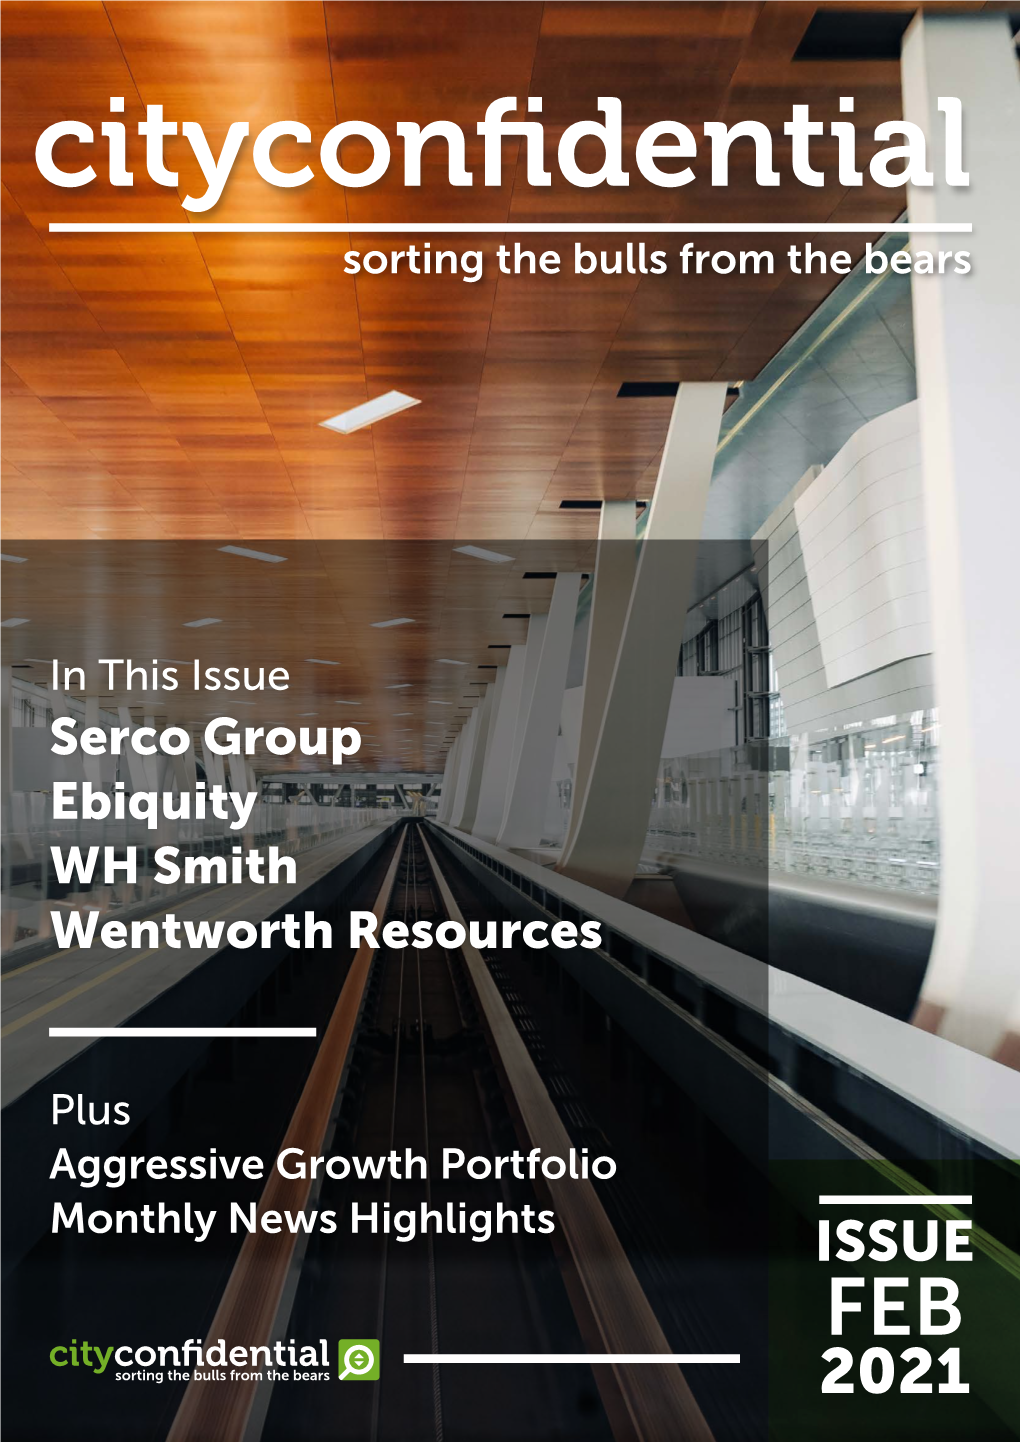 Serco Group Ebiquity WH Smith Wentworth Resources